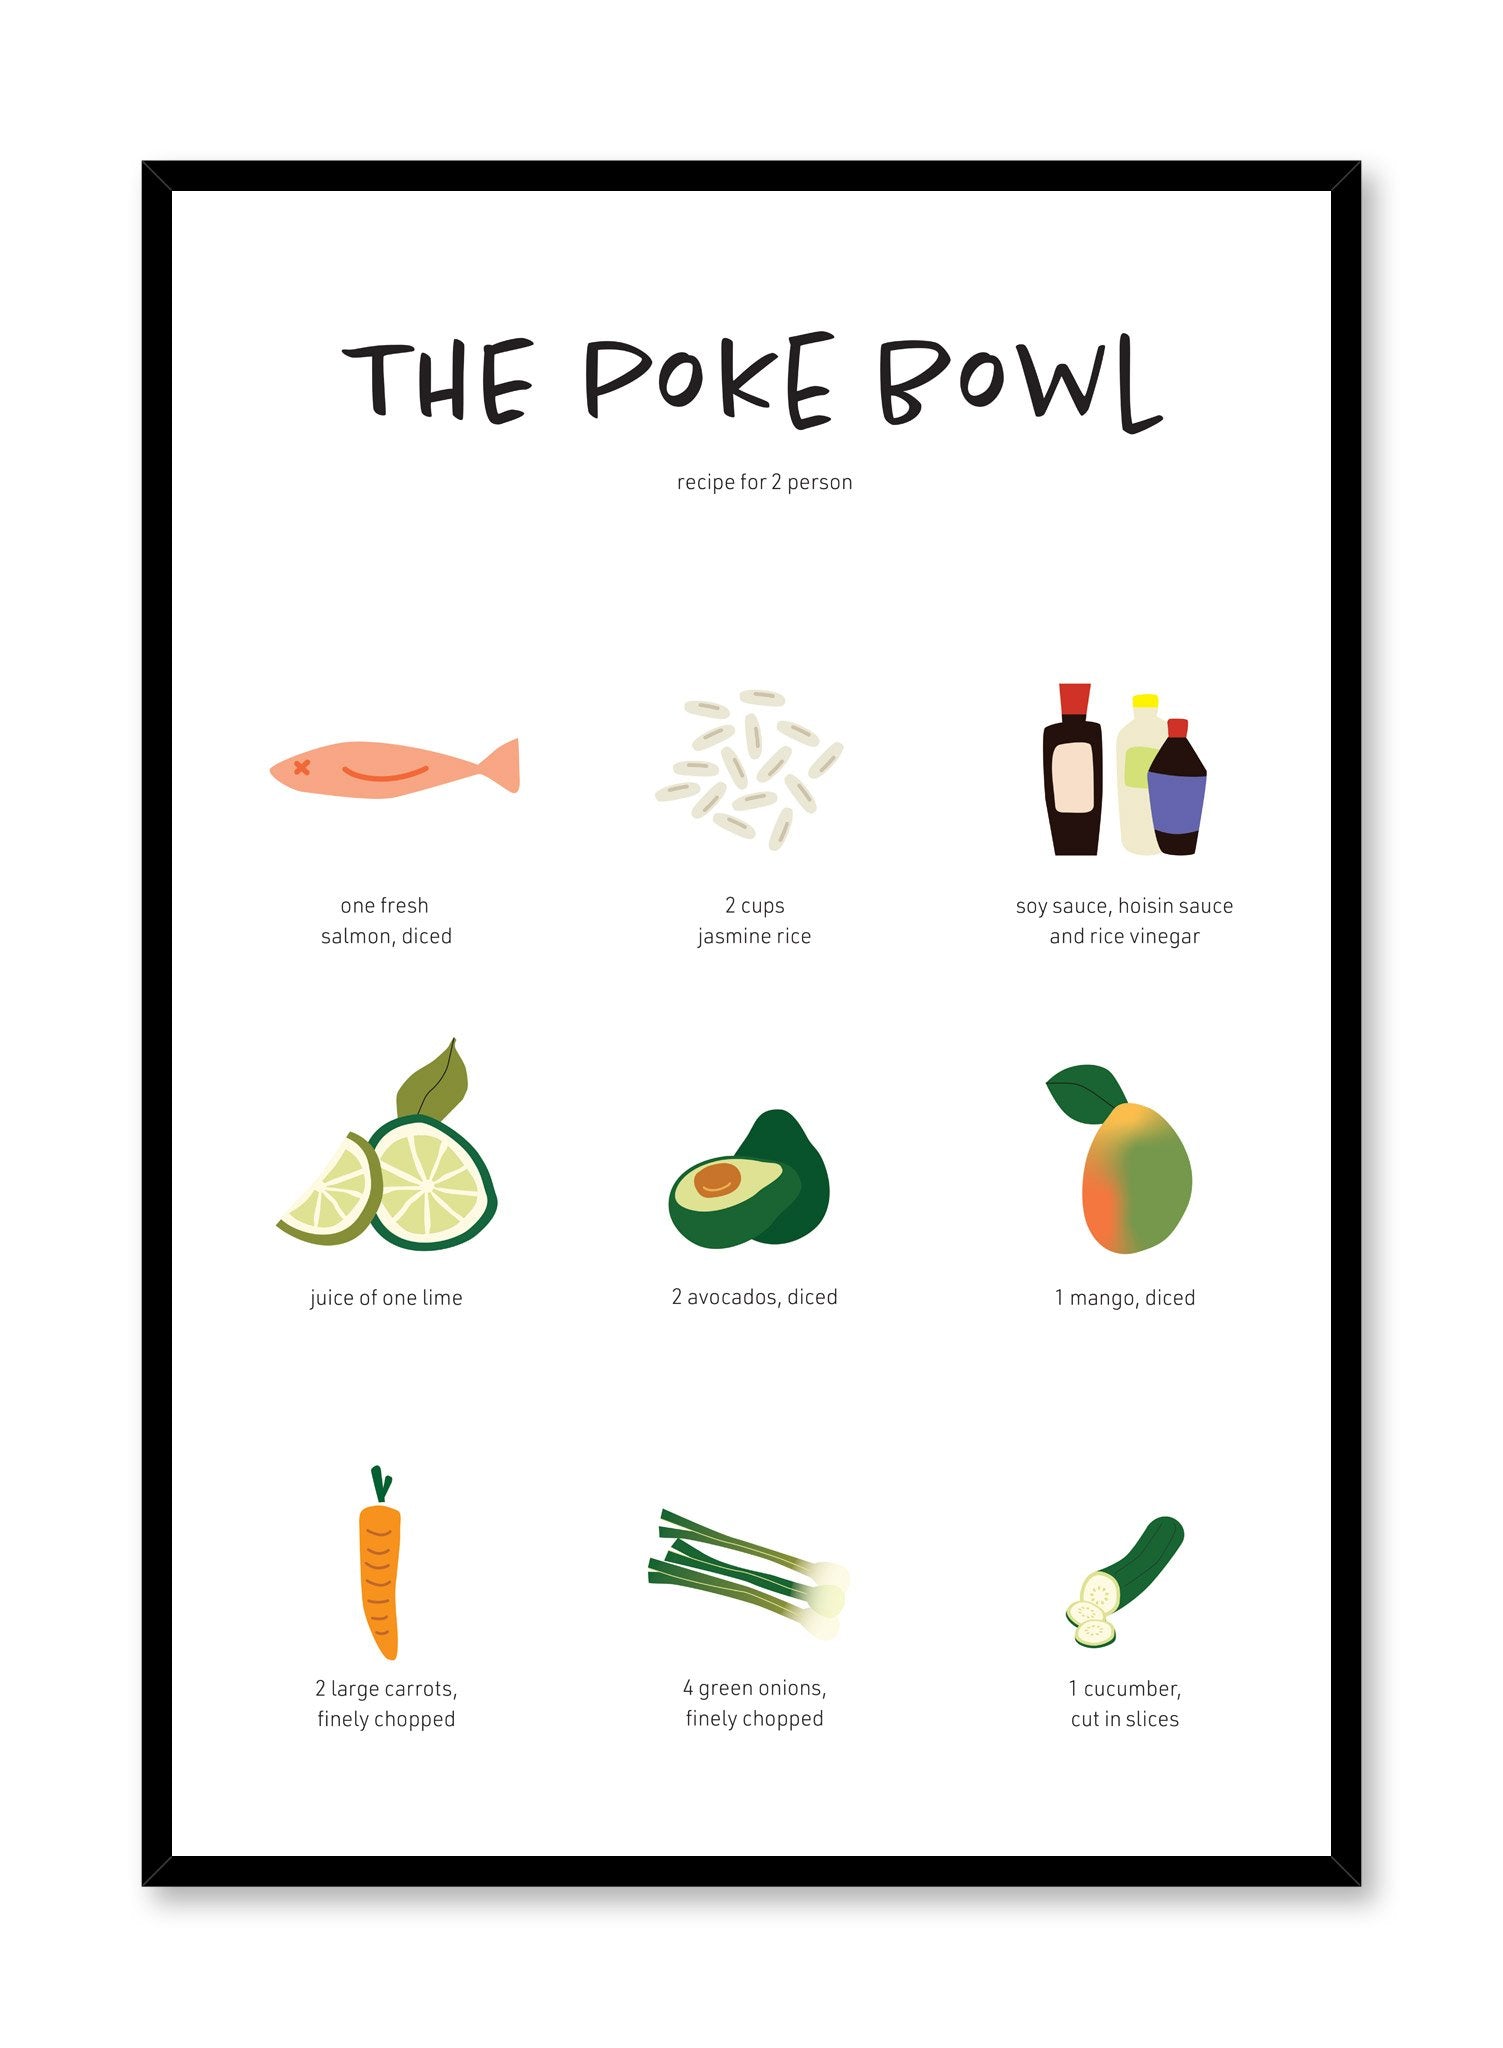 Poke Bowl Recipe is an illustrated recipe poster by Opposite Wall.